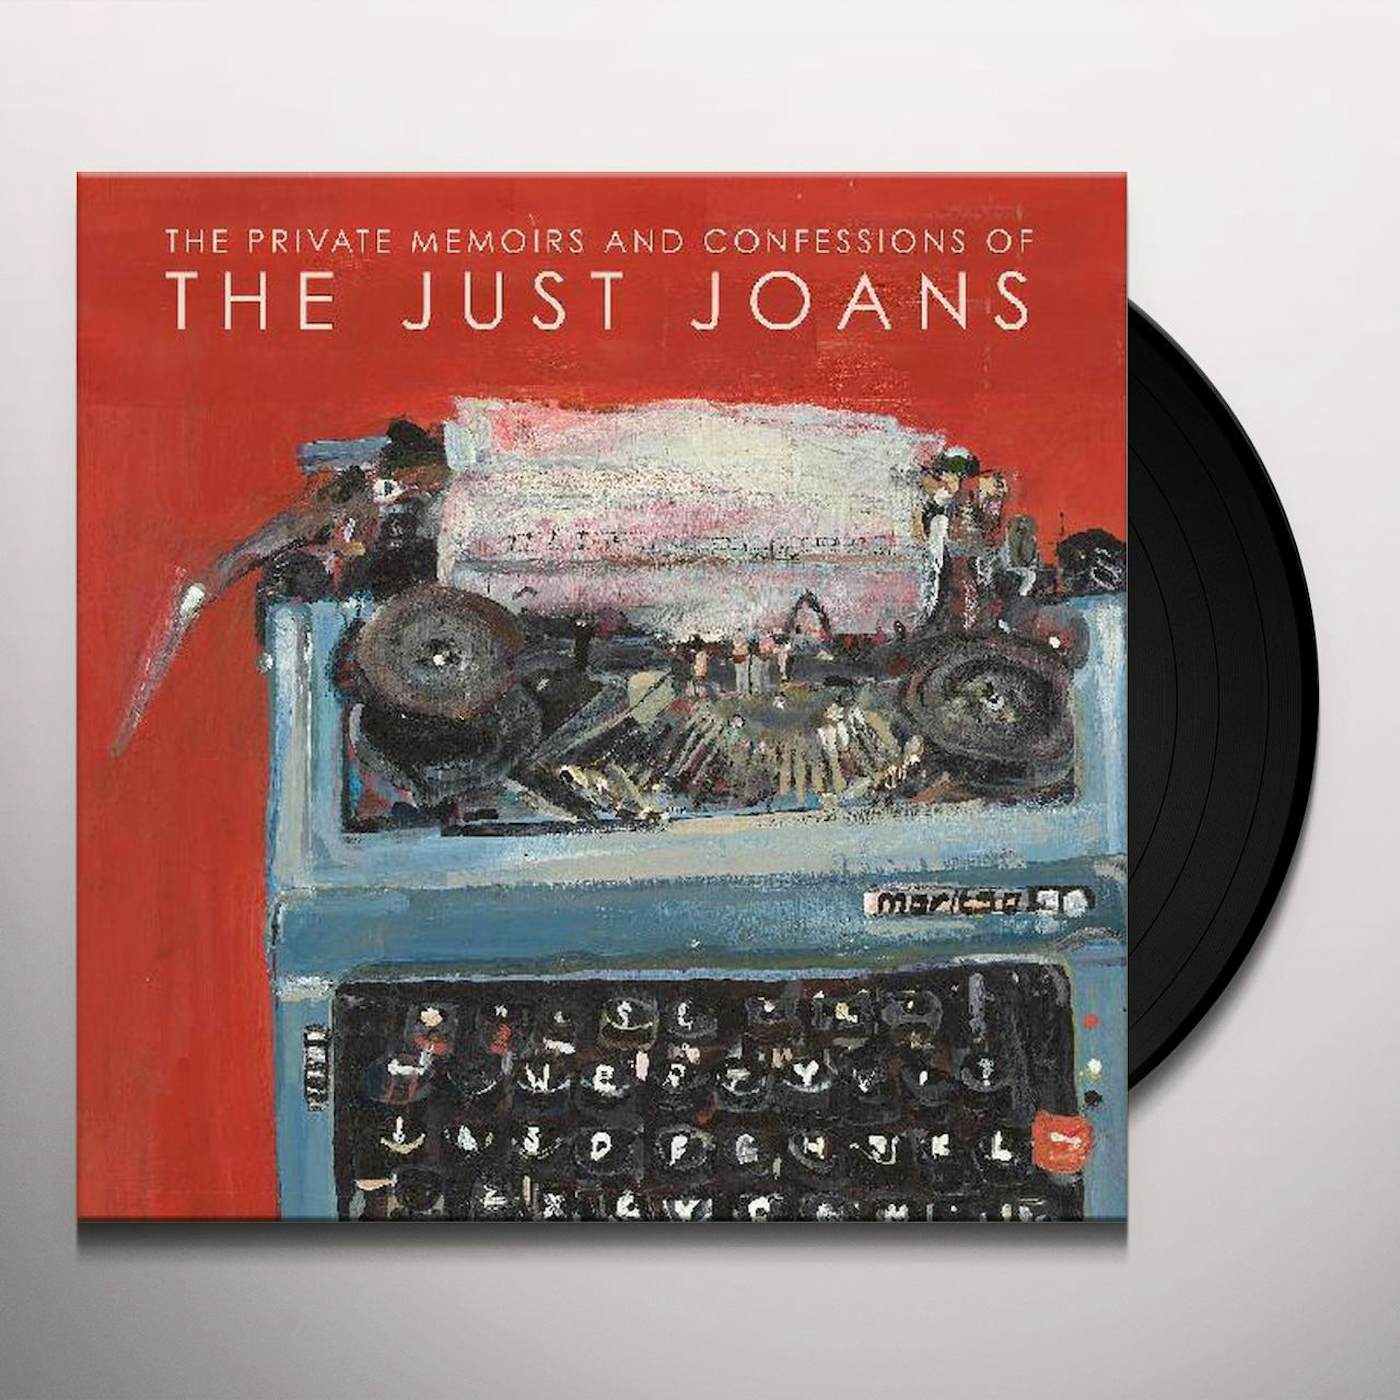 The private memoirs & confessions of the just joans Vinyl Record